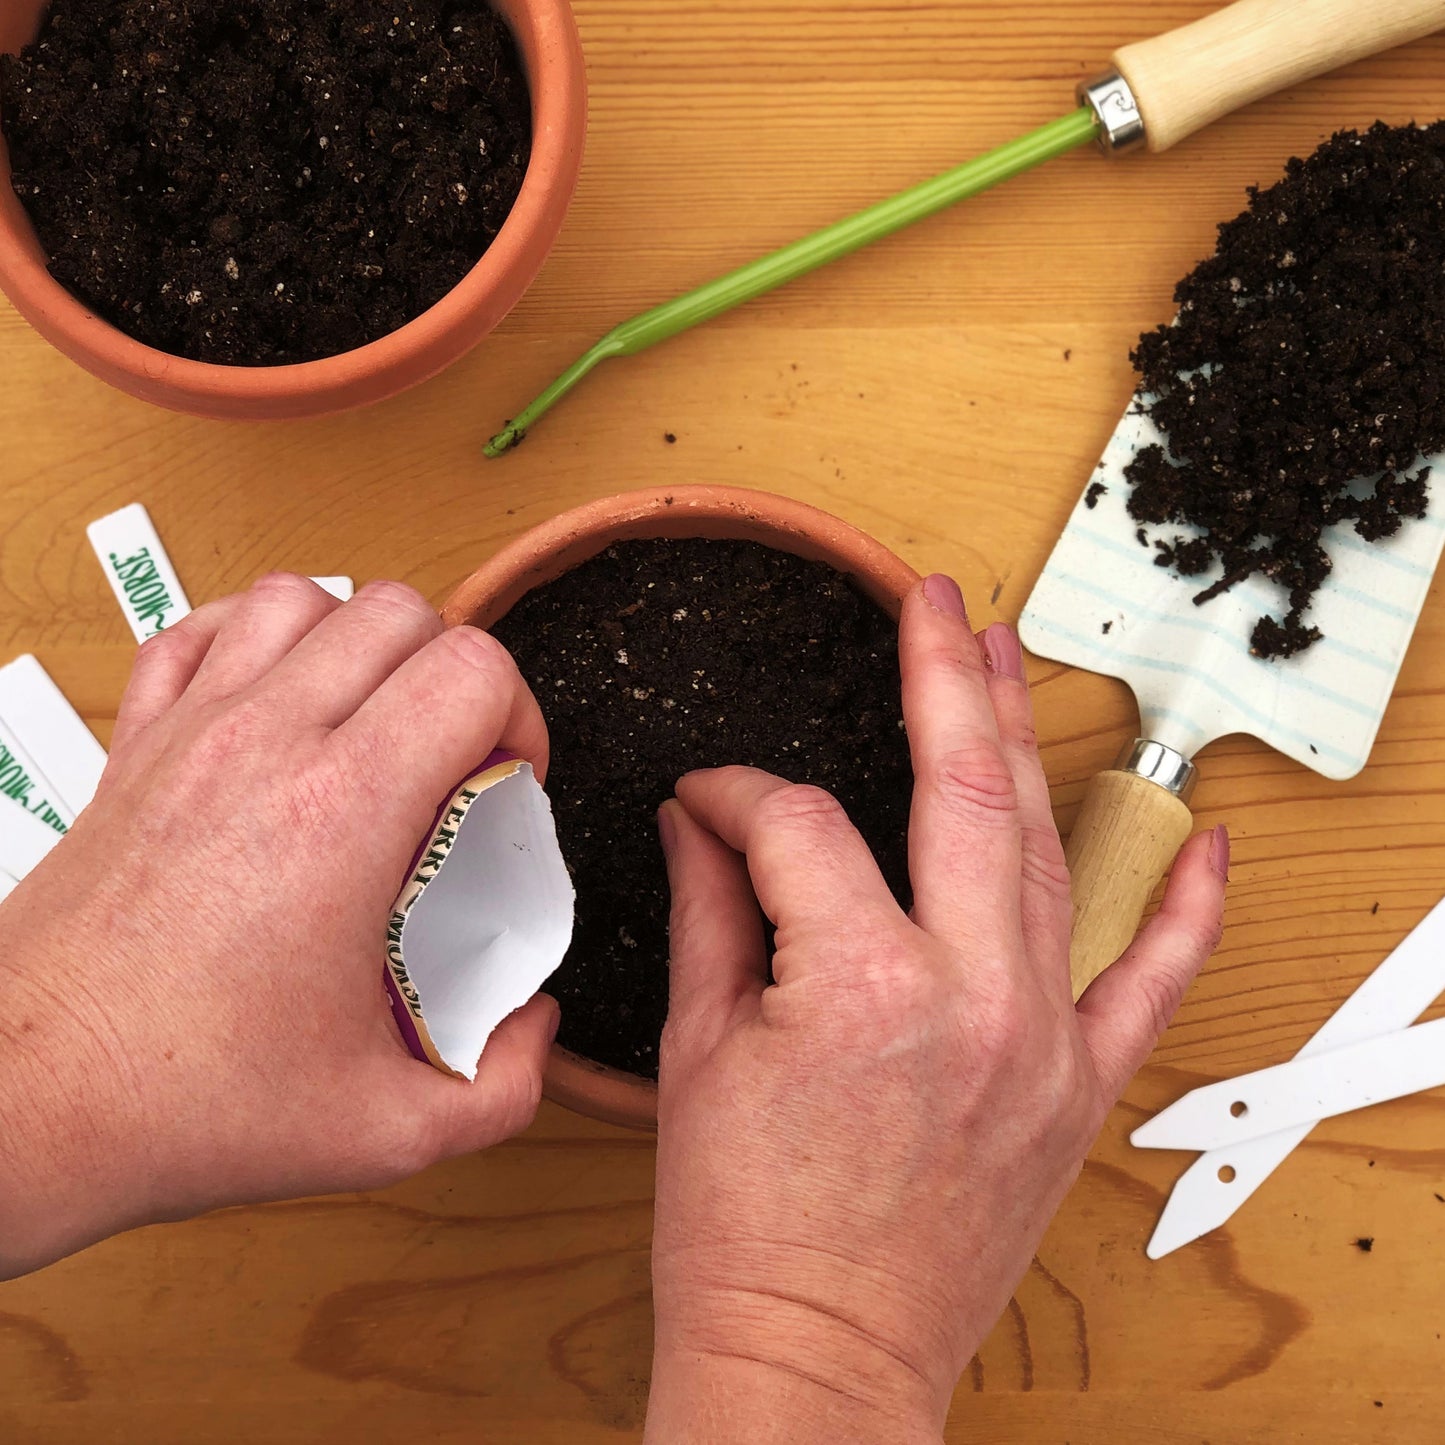 Sowing Organic Black Seeded Simpson Lettuce Seeds into 12"+ containers filled with a Jiffy seed starting mix.